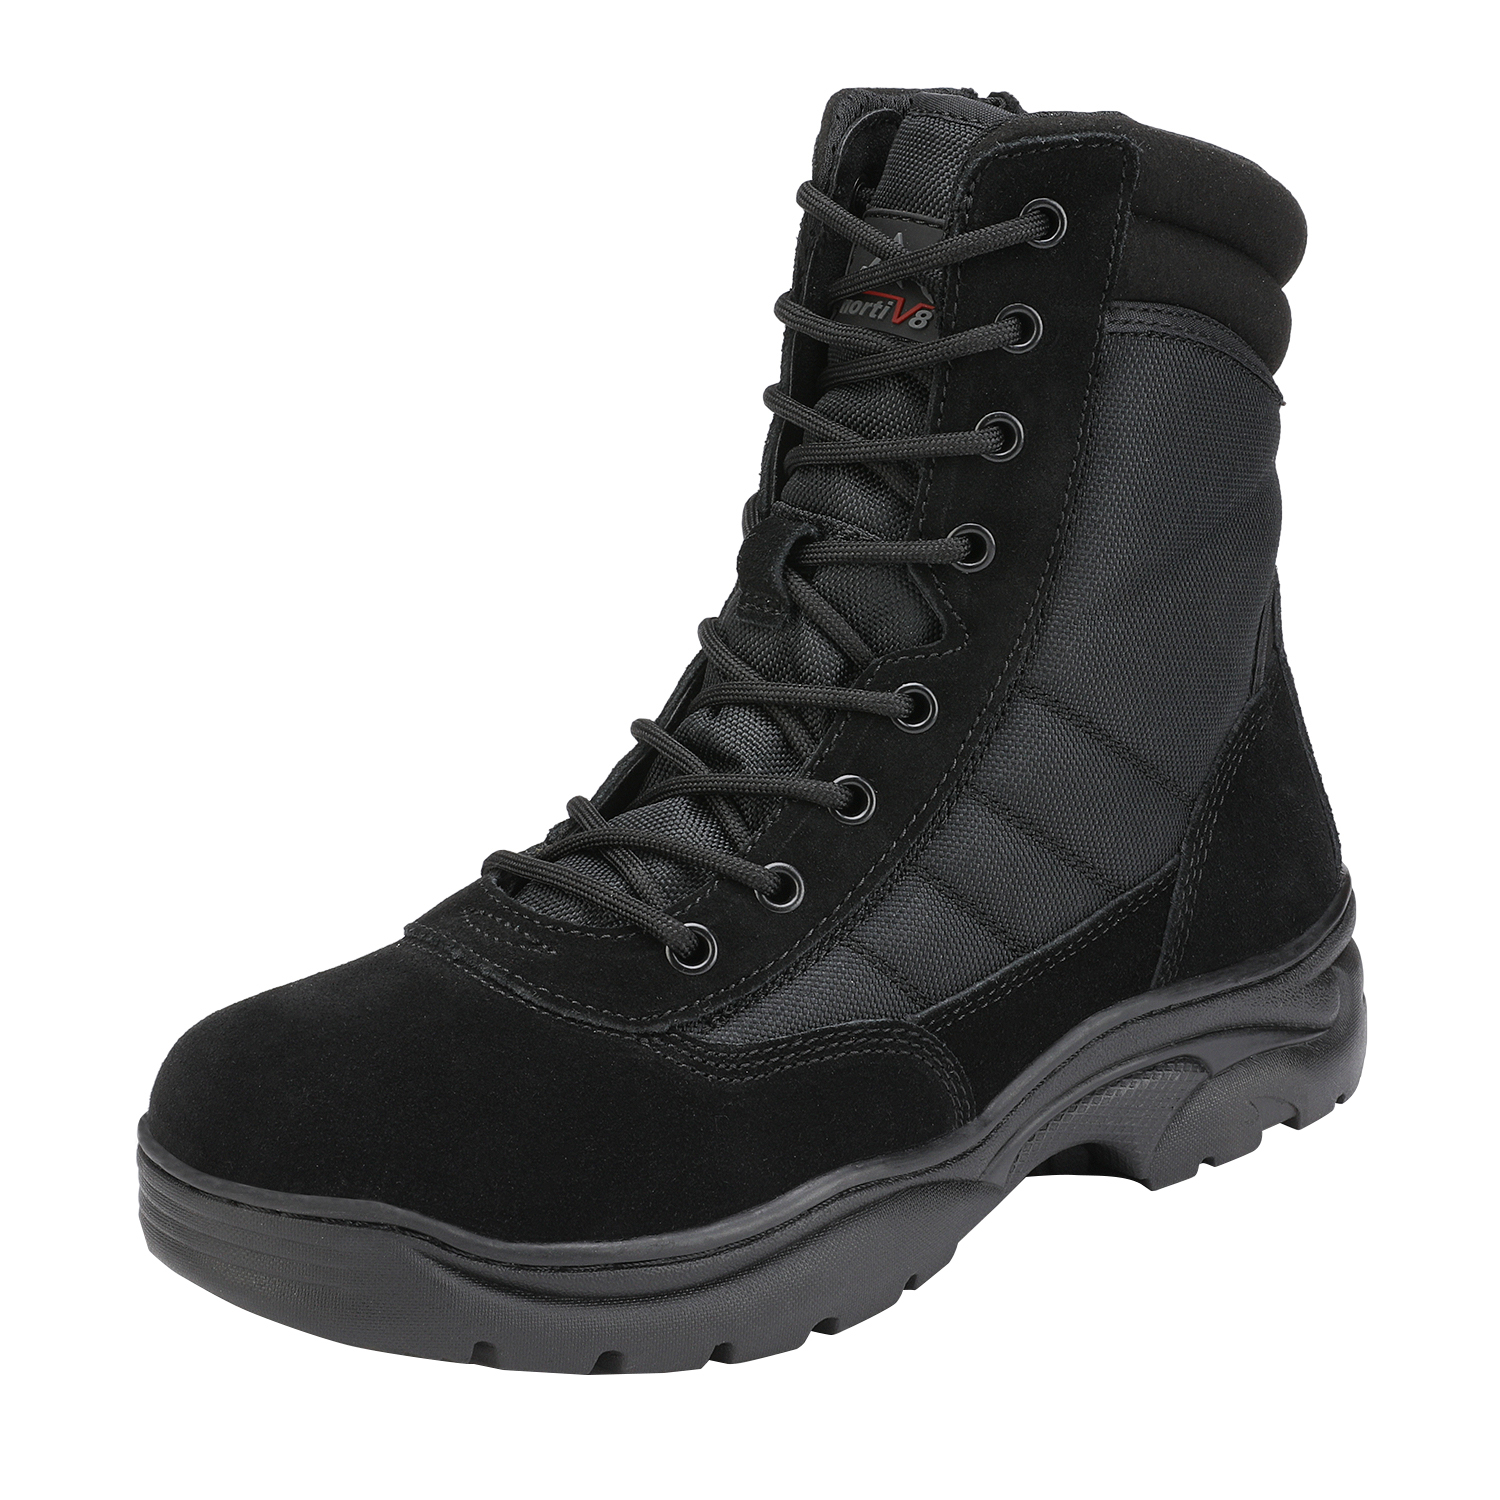 Nortiv 8 Men's Tactical Work Boots Zip Military Leather Motorcycle Combat Boots for Man Trooper Black/Suede Size 10 - image 1 of 6